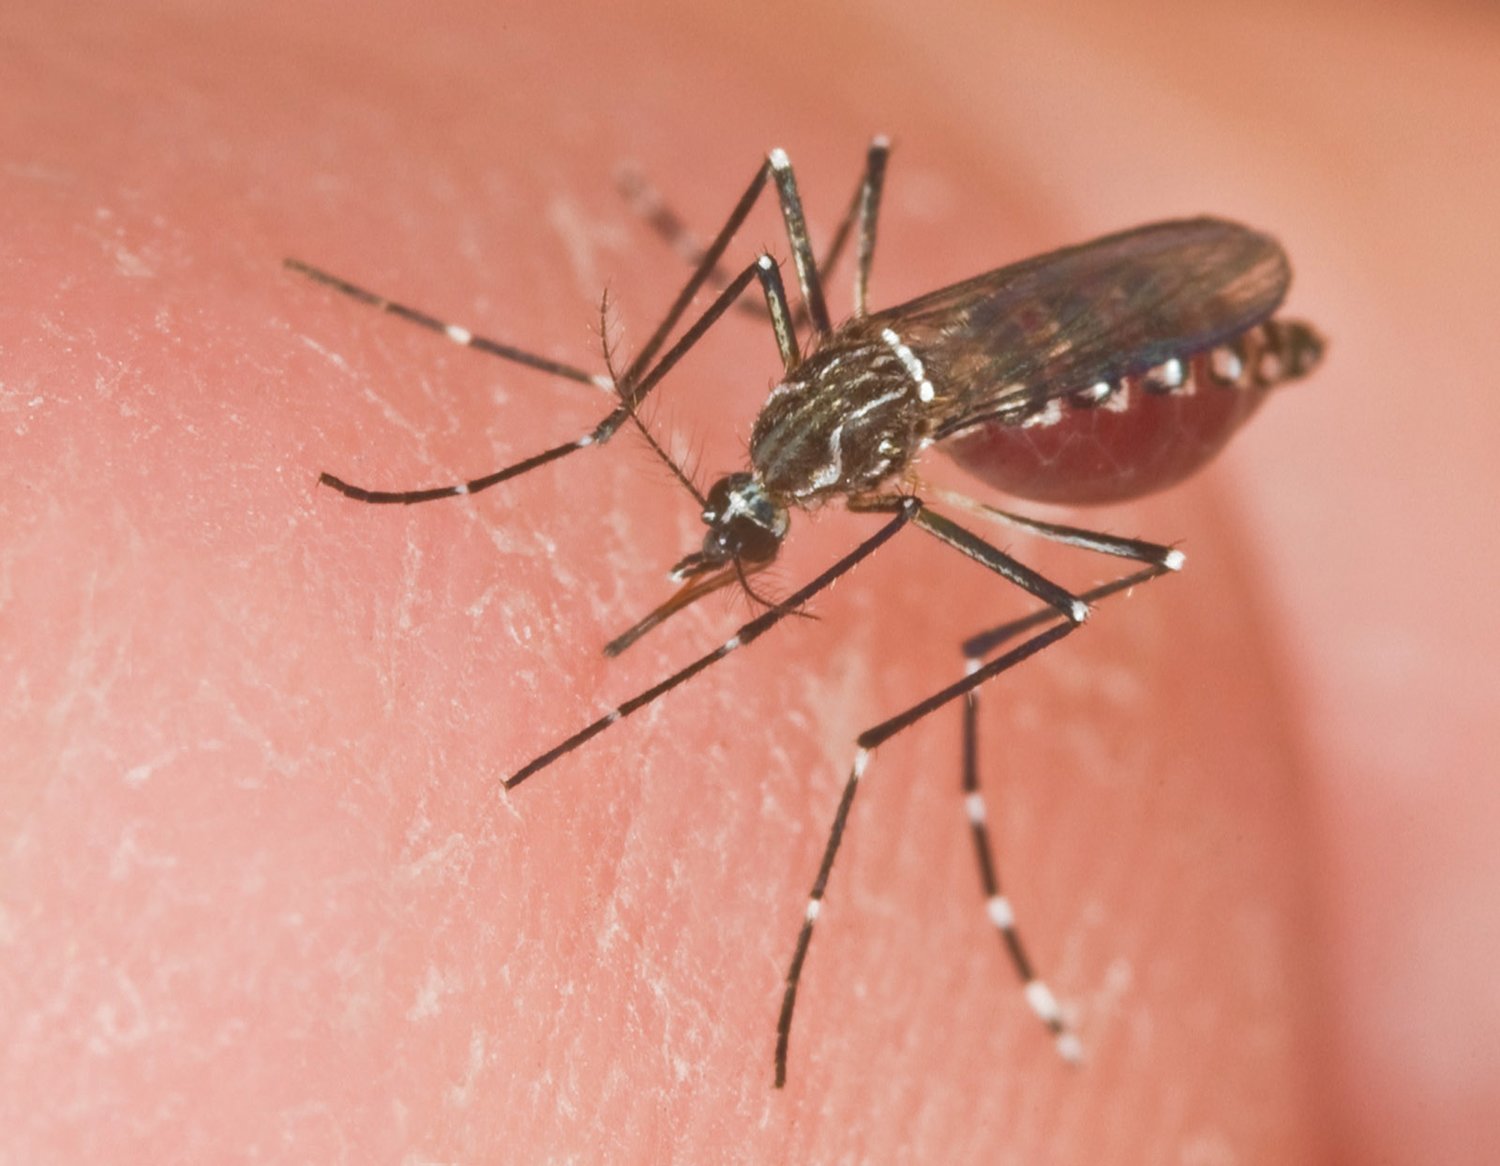 The invasive Aedes aegypti mosquito is responsible for infecting more than 400 million people worldwide each year with viruses such as dengue, yellow fever, chikungunya and Zika.